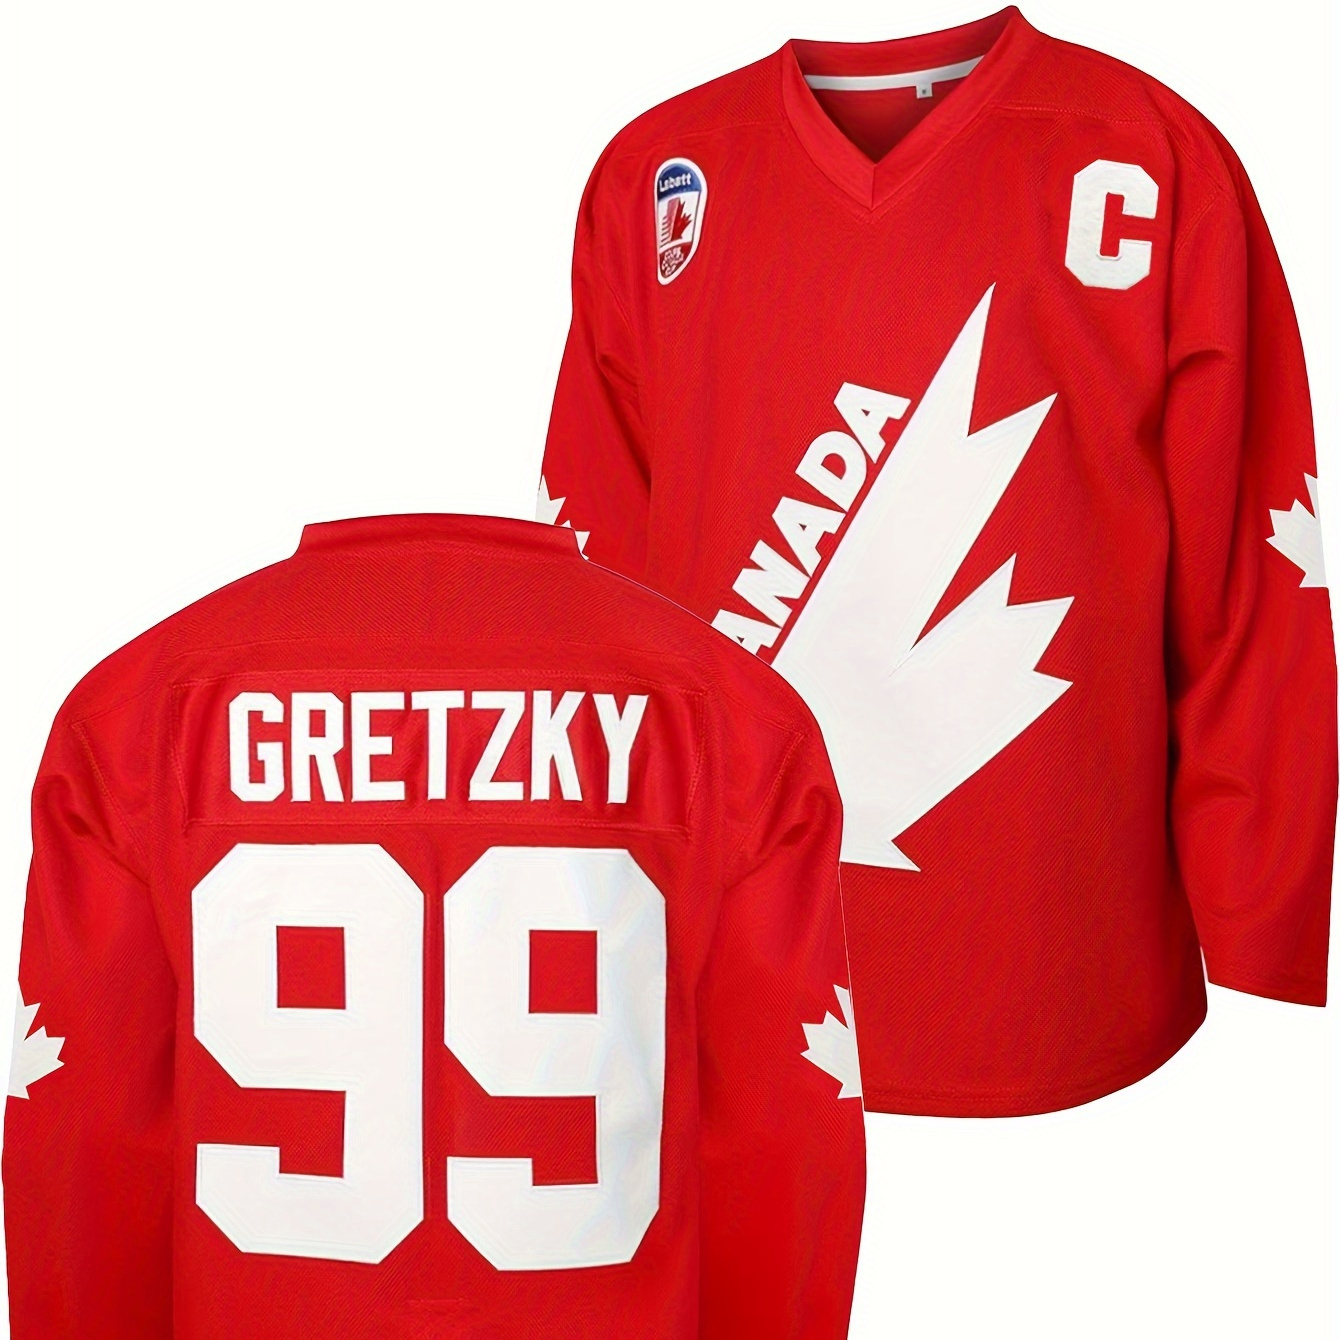 

Men's Red # 99 Maple Leaf Ice Hockey Sweatshirt, Loose Embroidered Long Sleeves, Sports Fashion Casual, Street Breathable